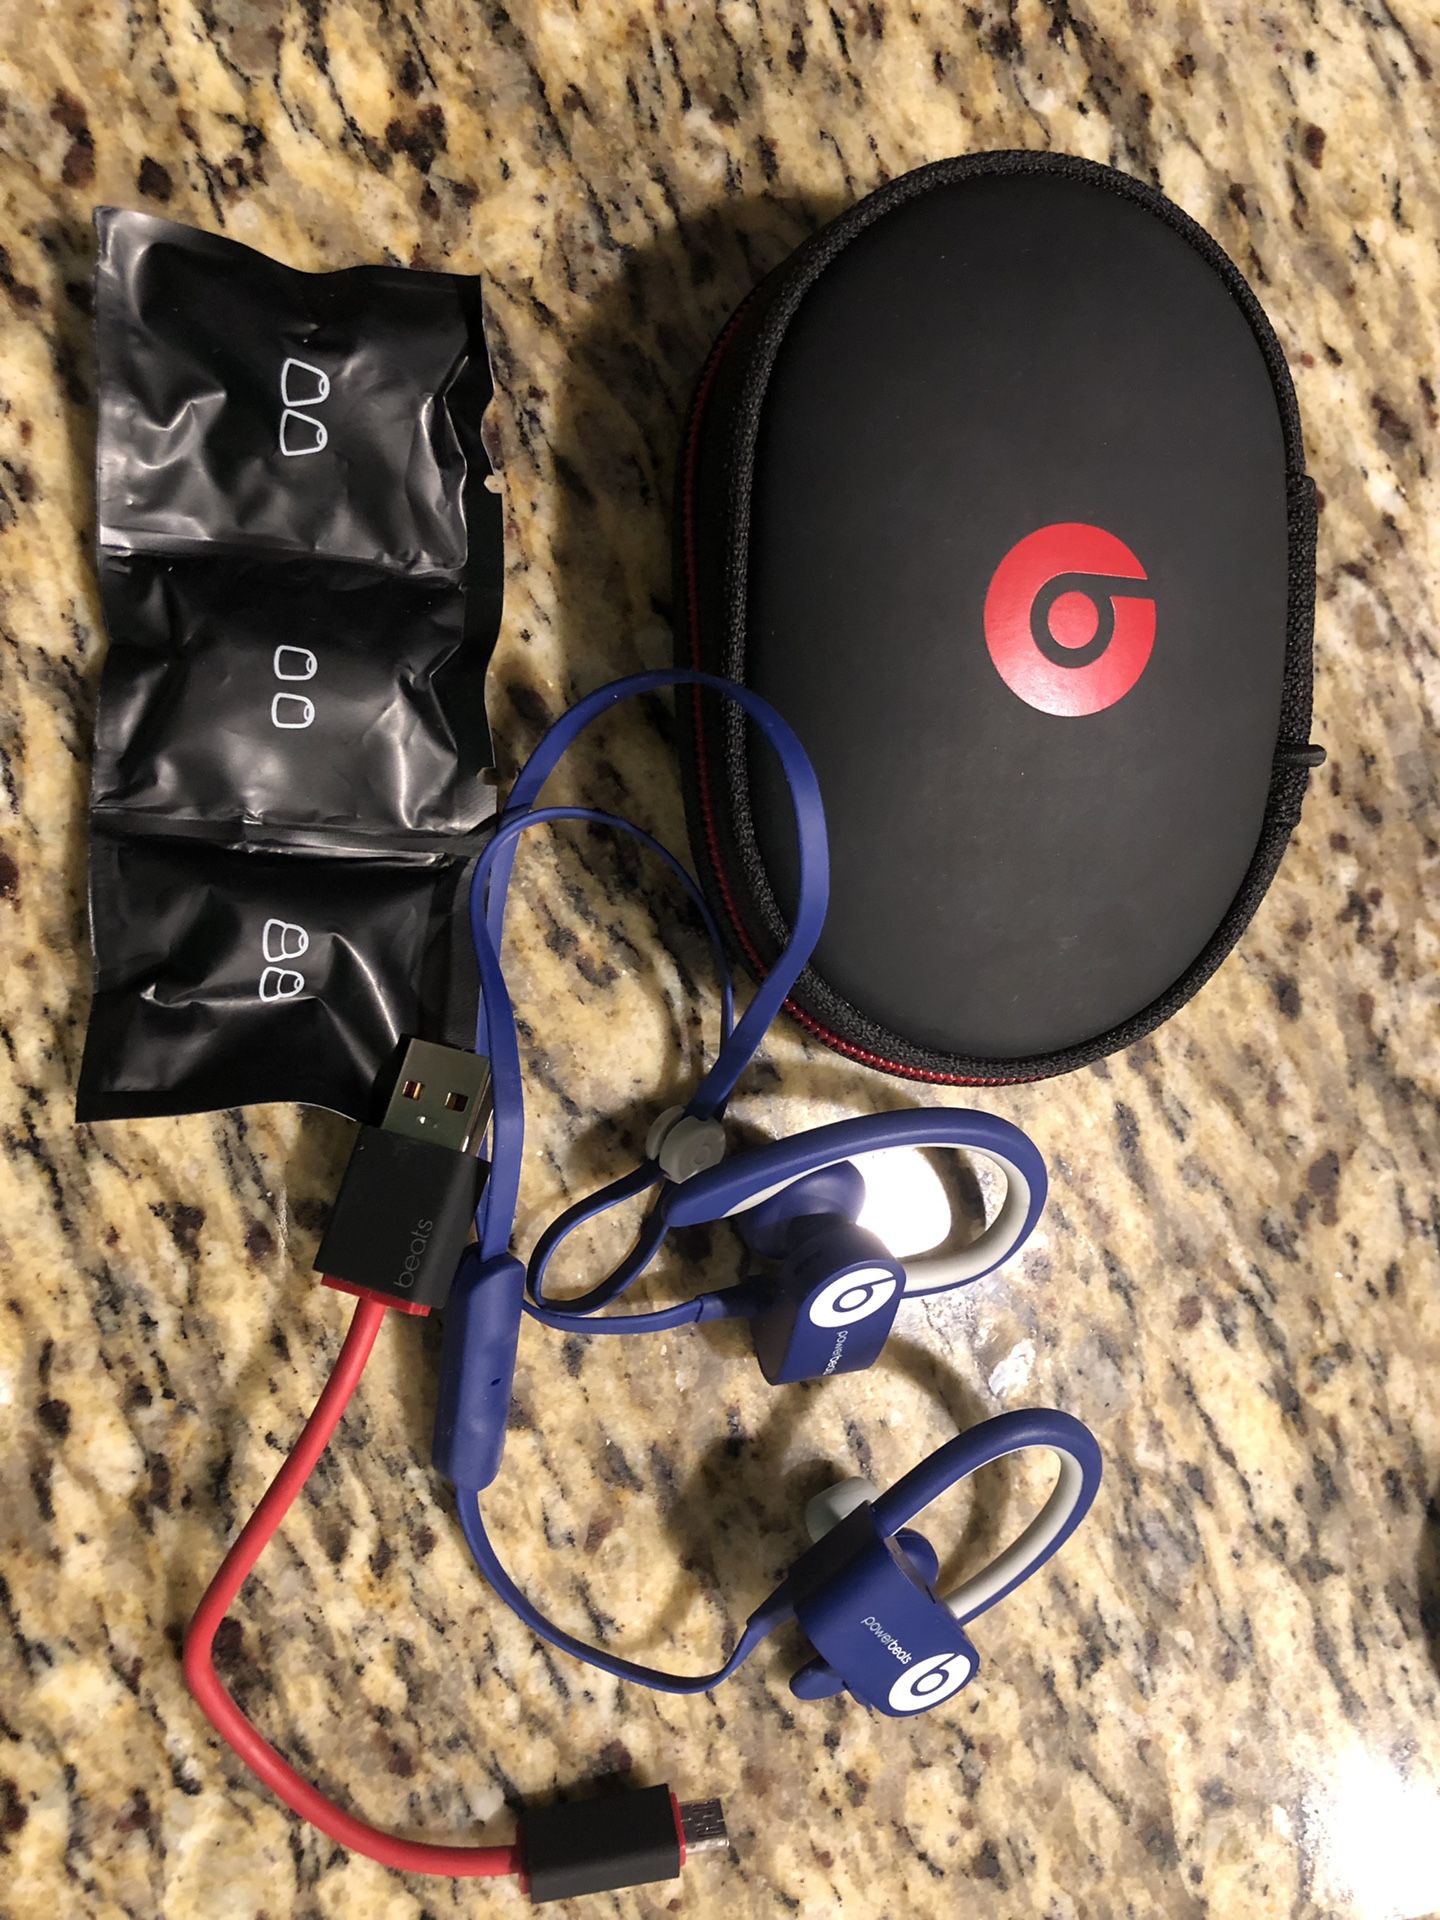 POWERBEATS w case/ extra buds/ charger cord